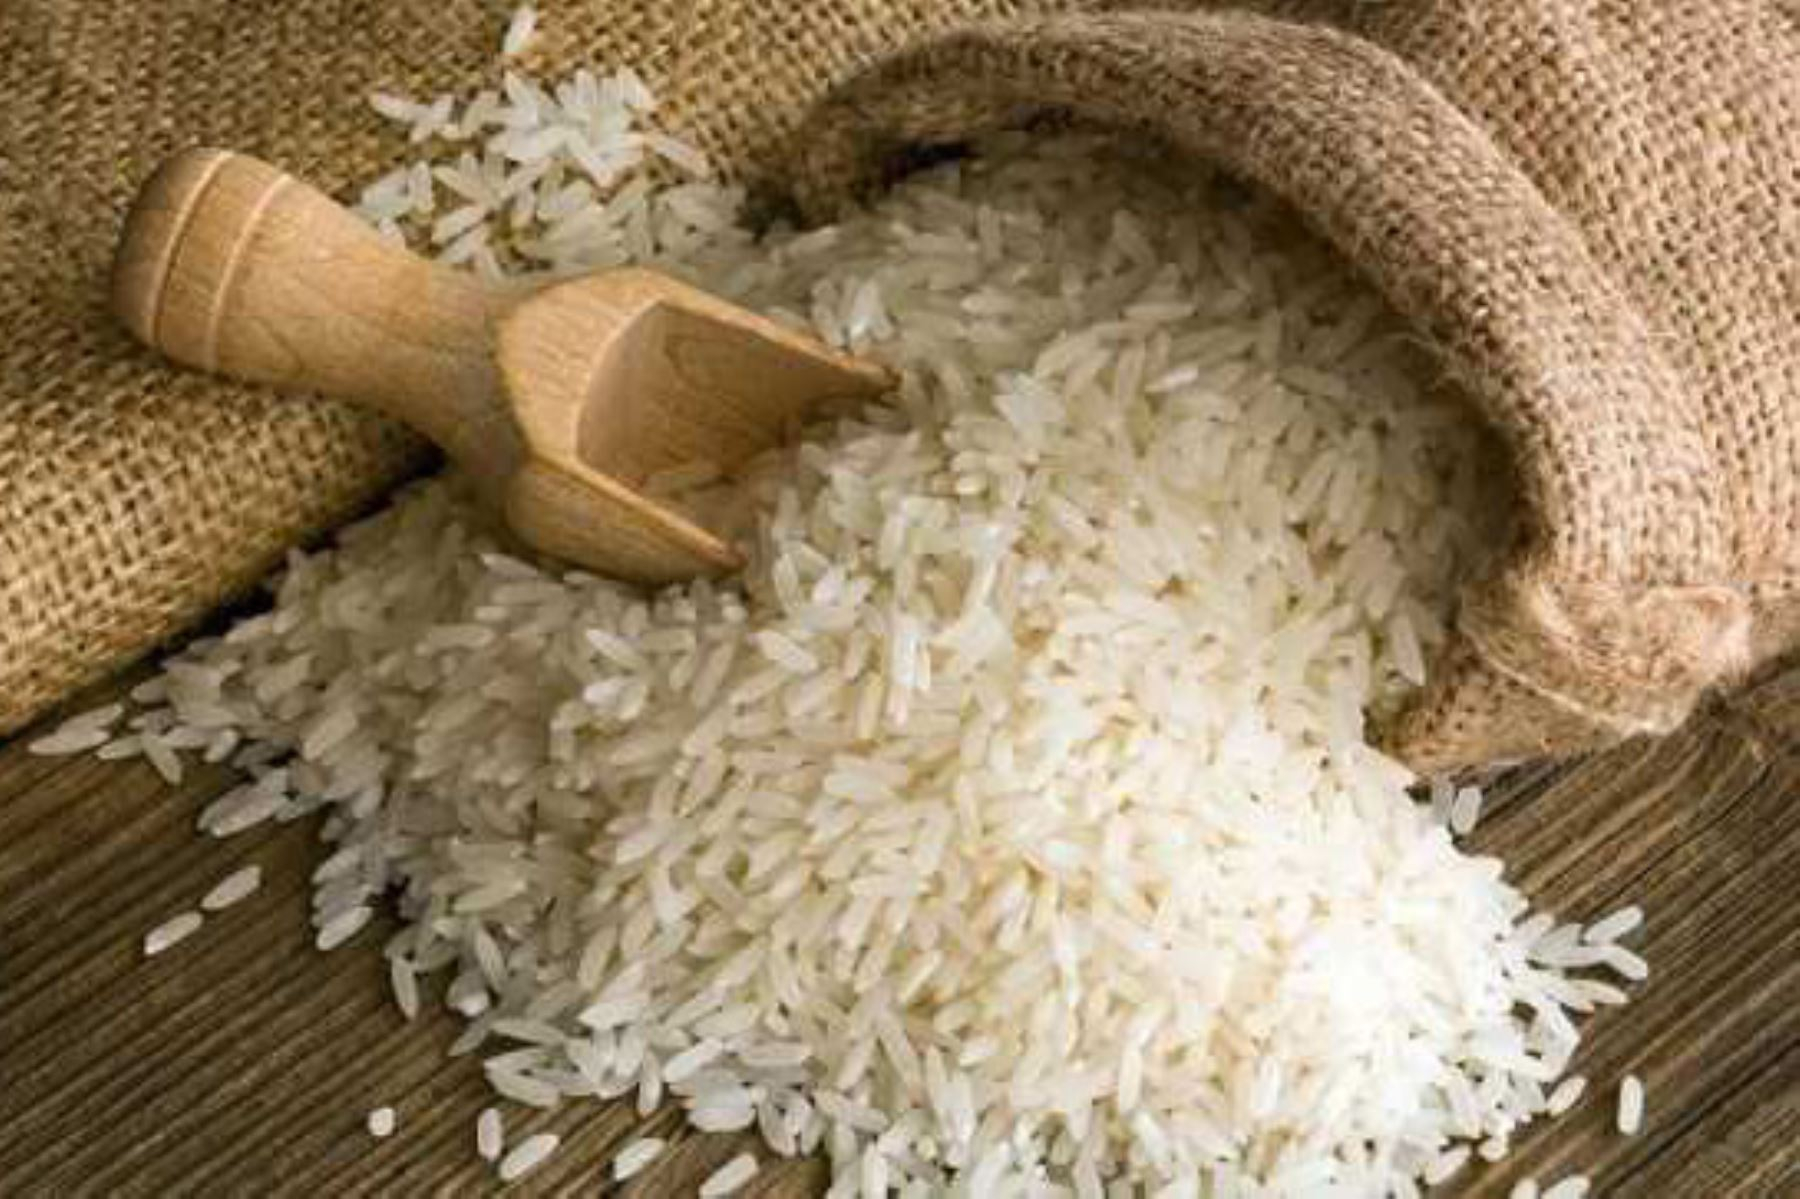 Midagri: Peruvian rice exports to Colombia could reach up to 100,000 tons per year